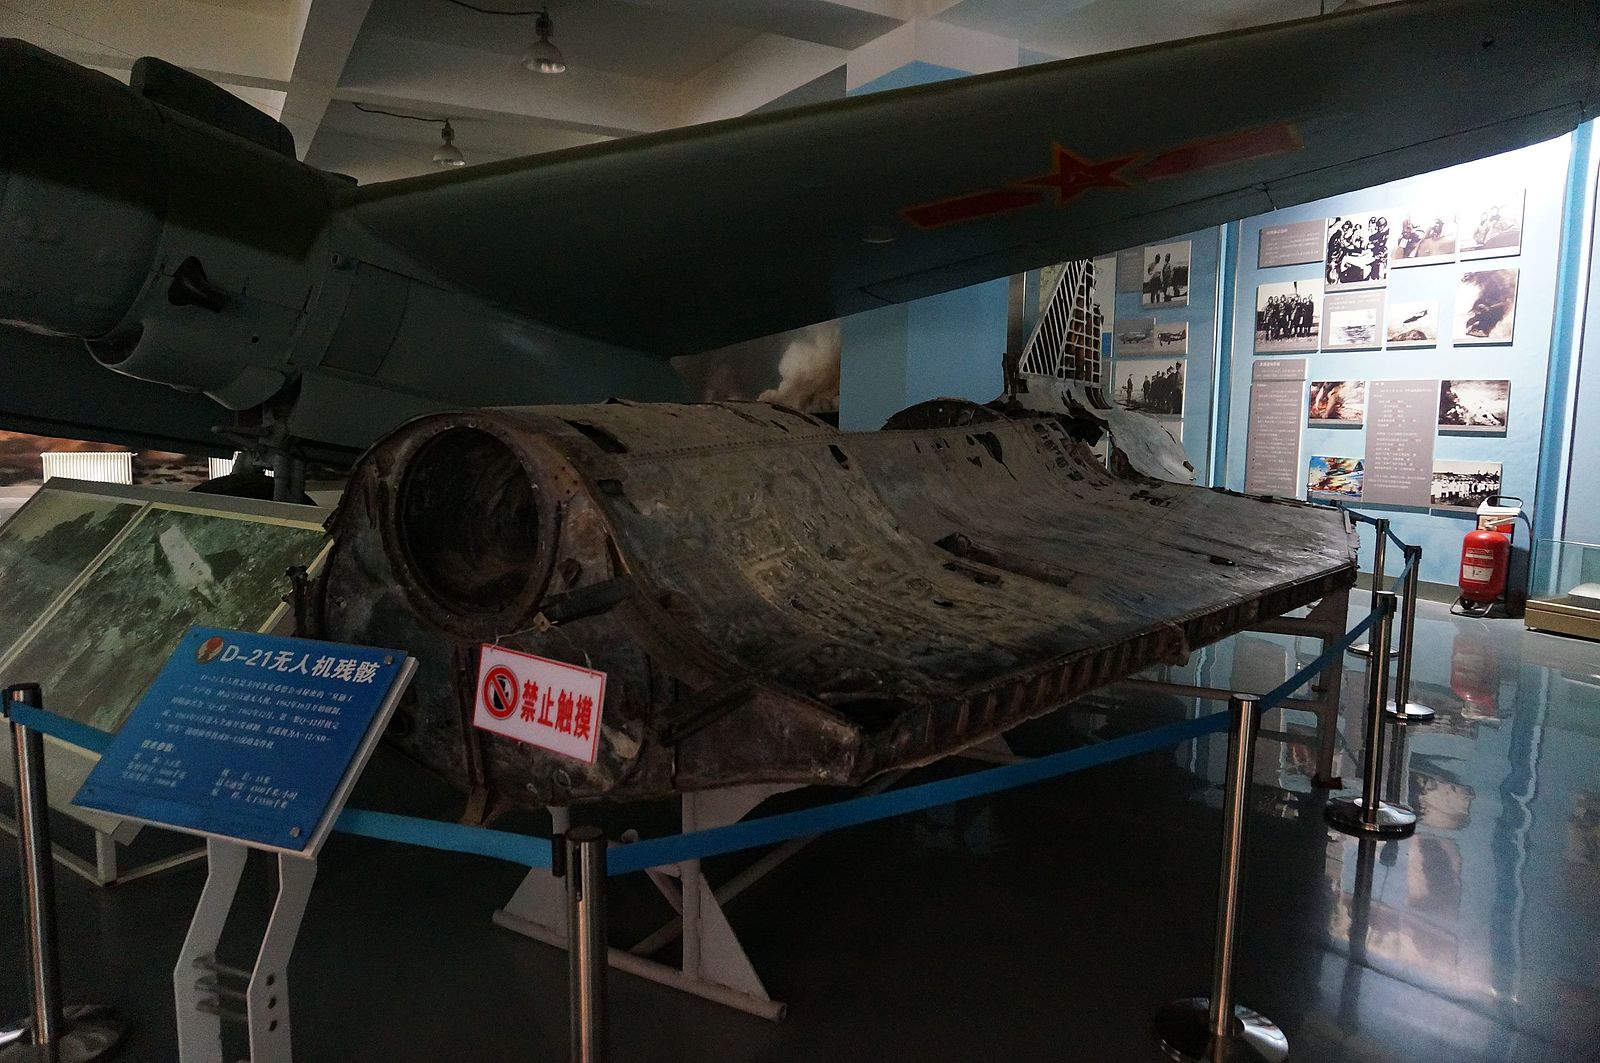 1600px-Lockheed_D-21_Wreck_in_China_Aviation_Museum.jpg